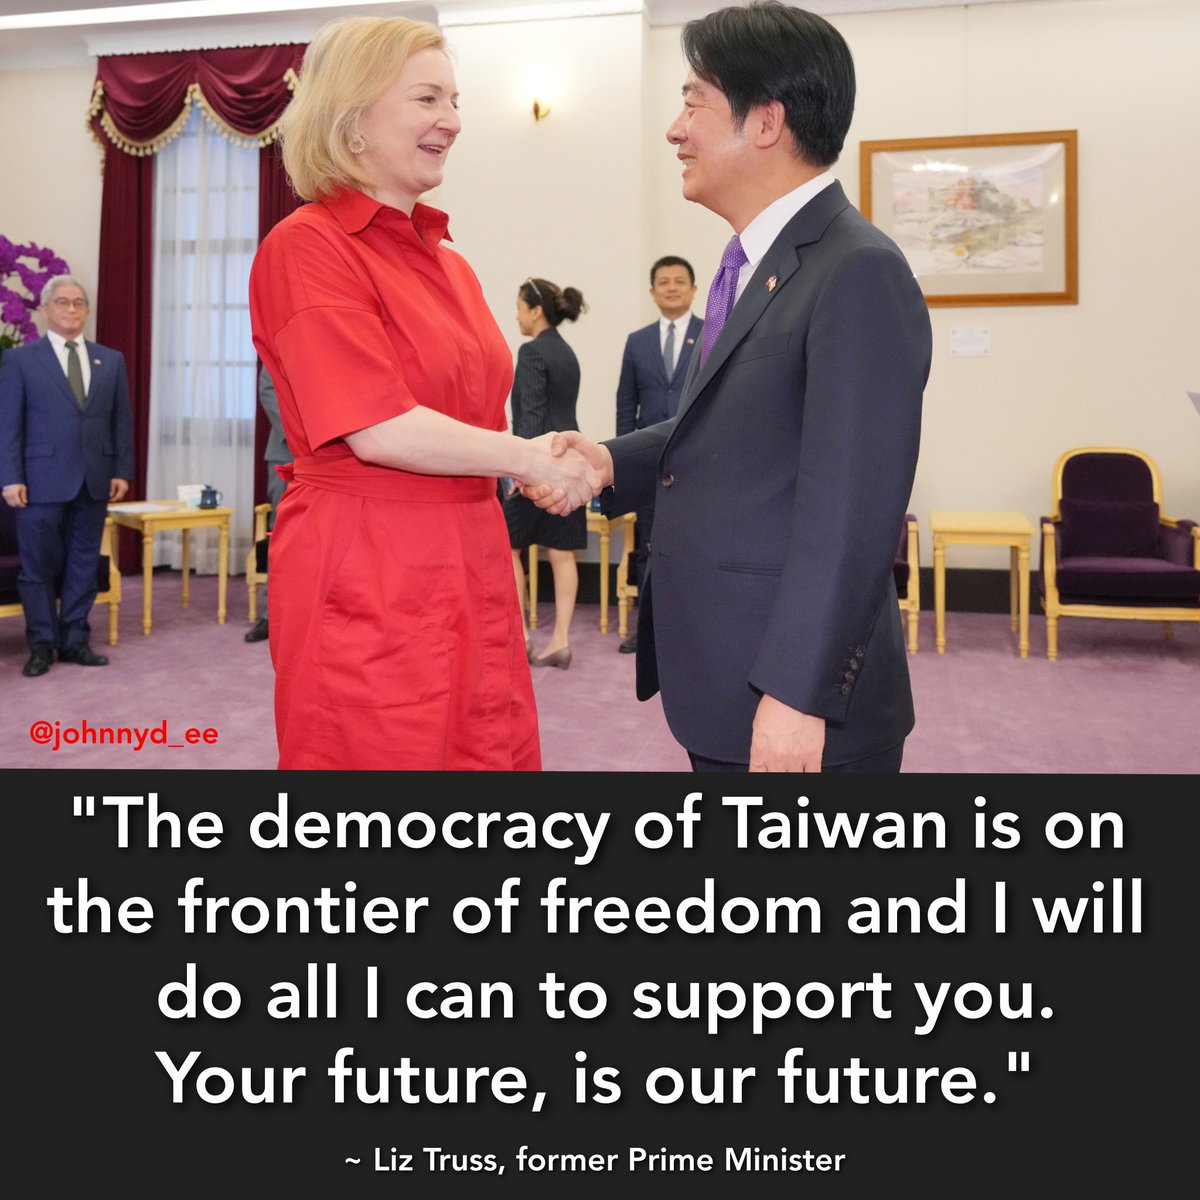 🚨 WTF is 'Liability Liz' even doing in #Taiwan? She's a back bencher who managed to f*ck the country over, in the very short time she was PM. 

Who even sanctions a trip like this for @trussliz? 💁🏻‍♂️

#ToriesUnfitToGovern 
#ToriesBrokeBritain 
#ToryCorruption 
#ToriesOut316